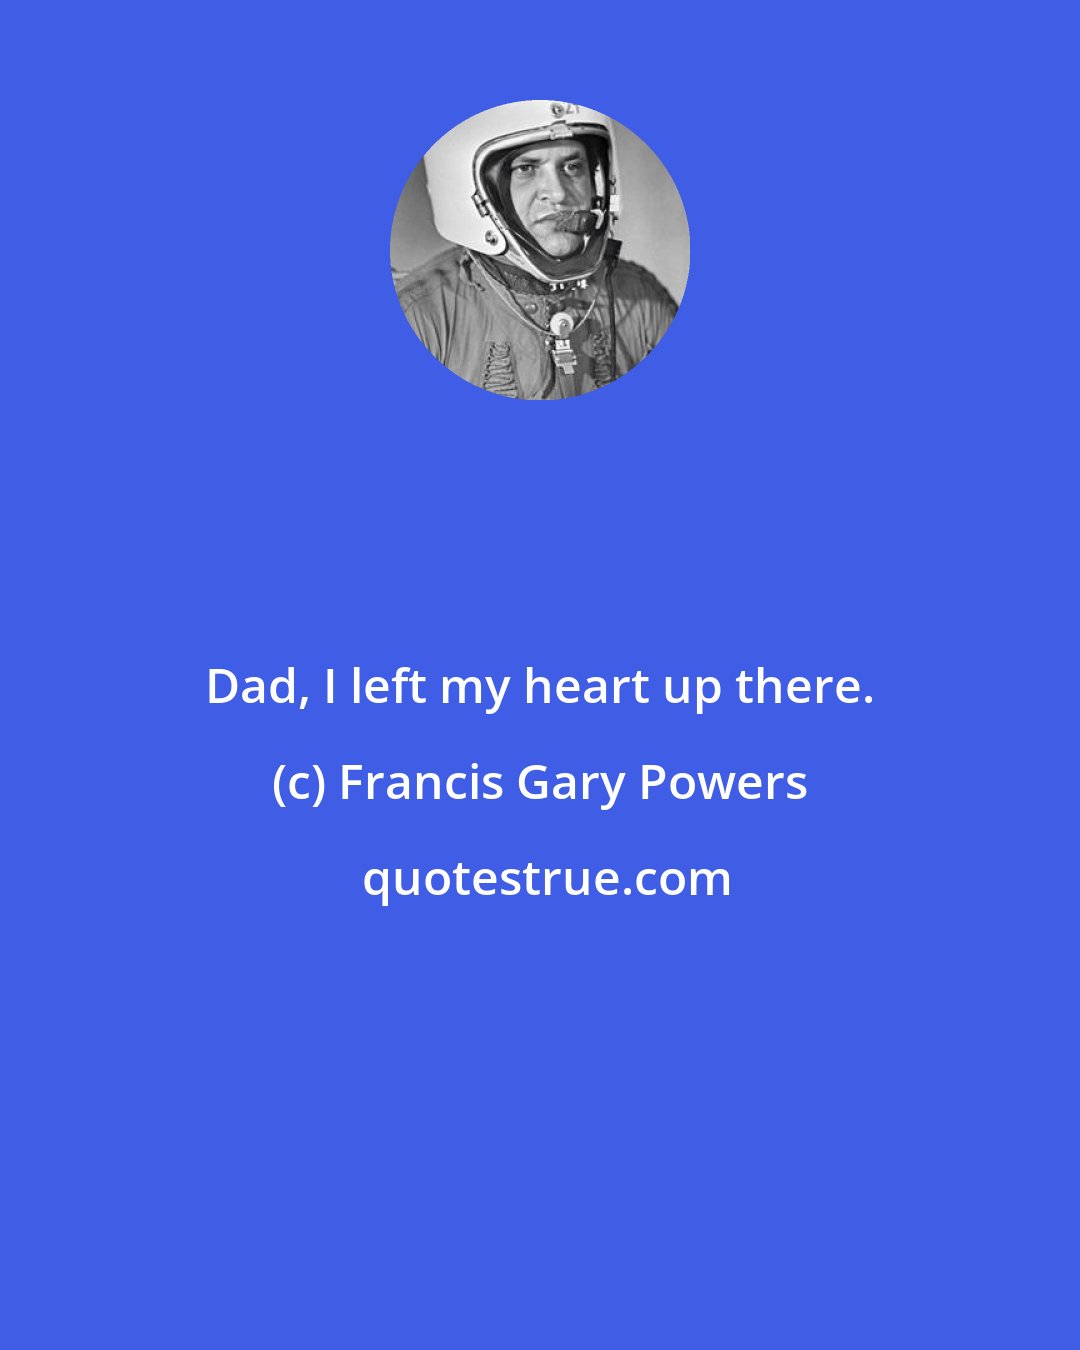 Francis Gary Powers: Dad, I left my heart up there.